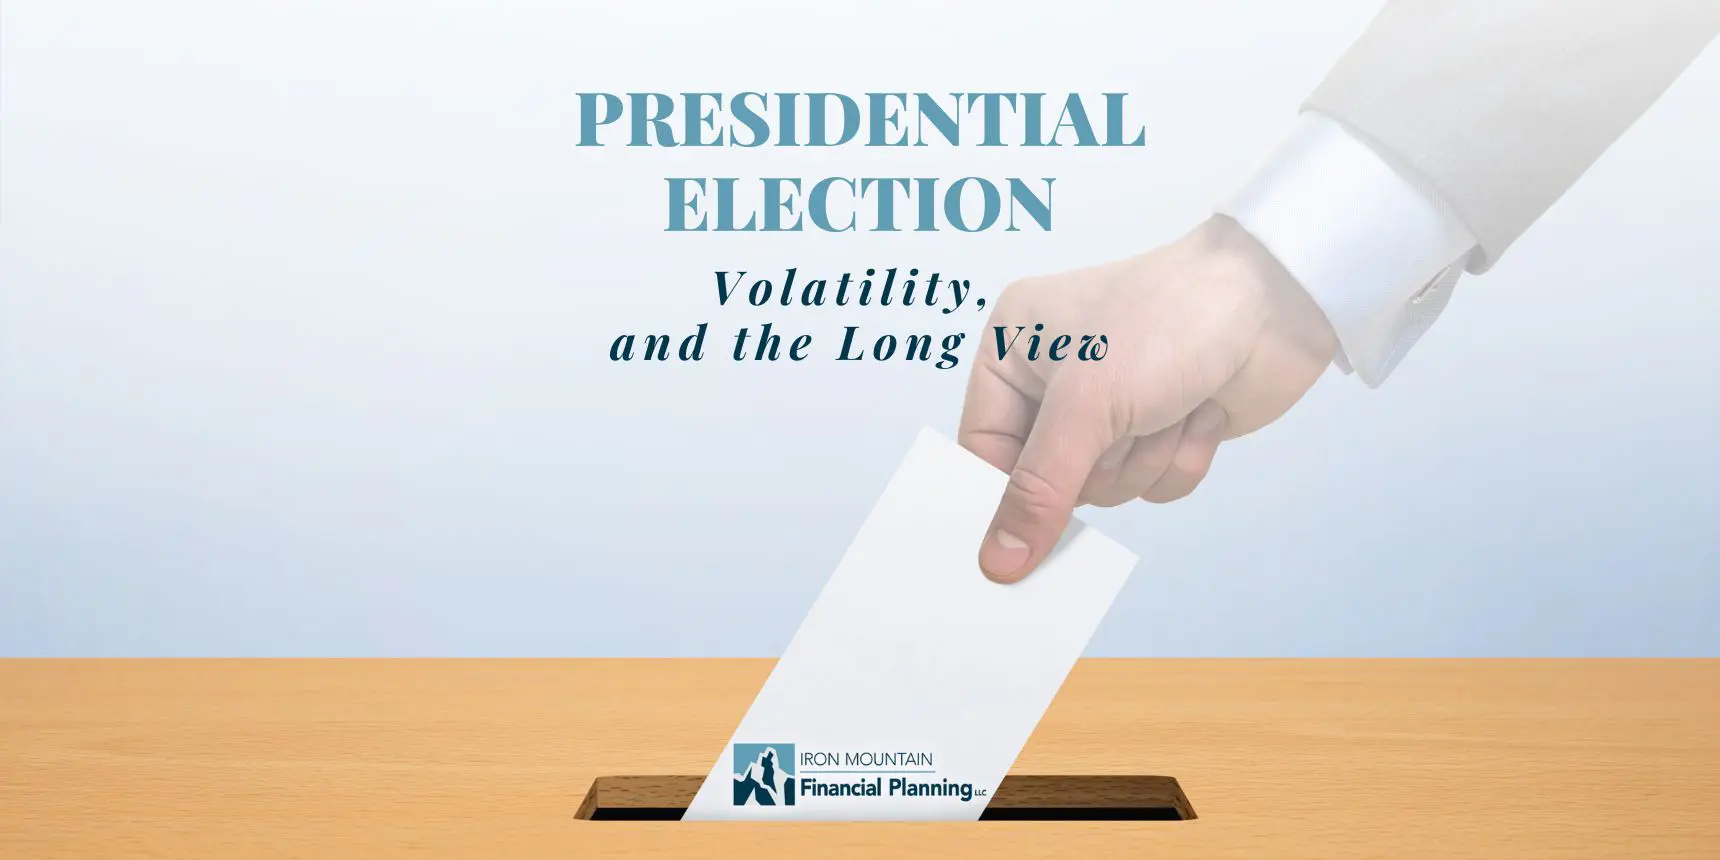 presidential election volatility and the long view from a Rapid City financial advisor